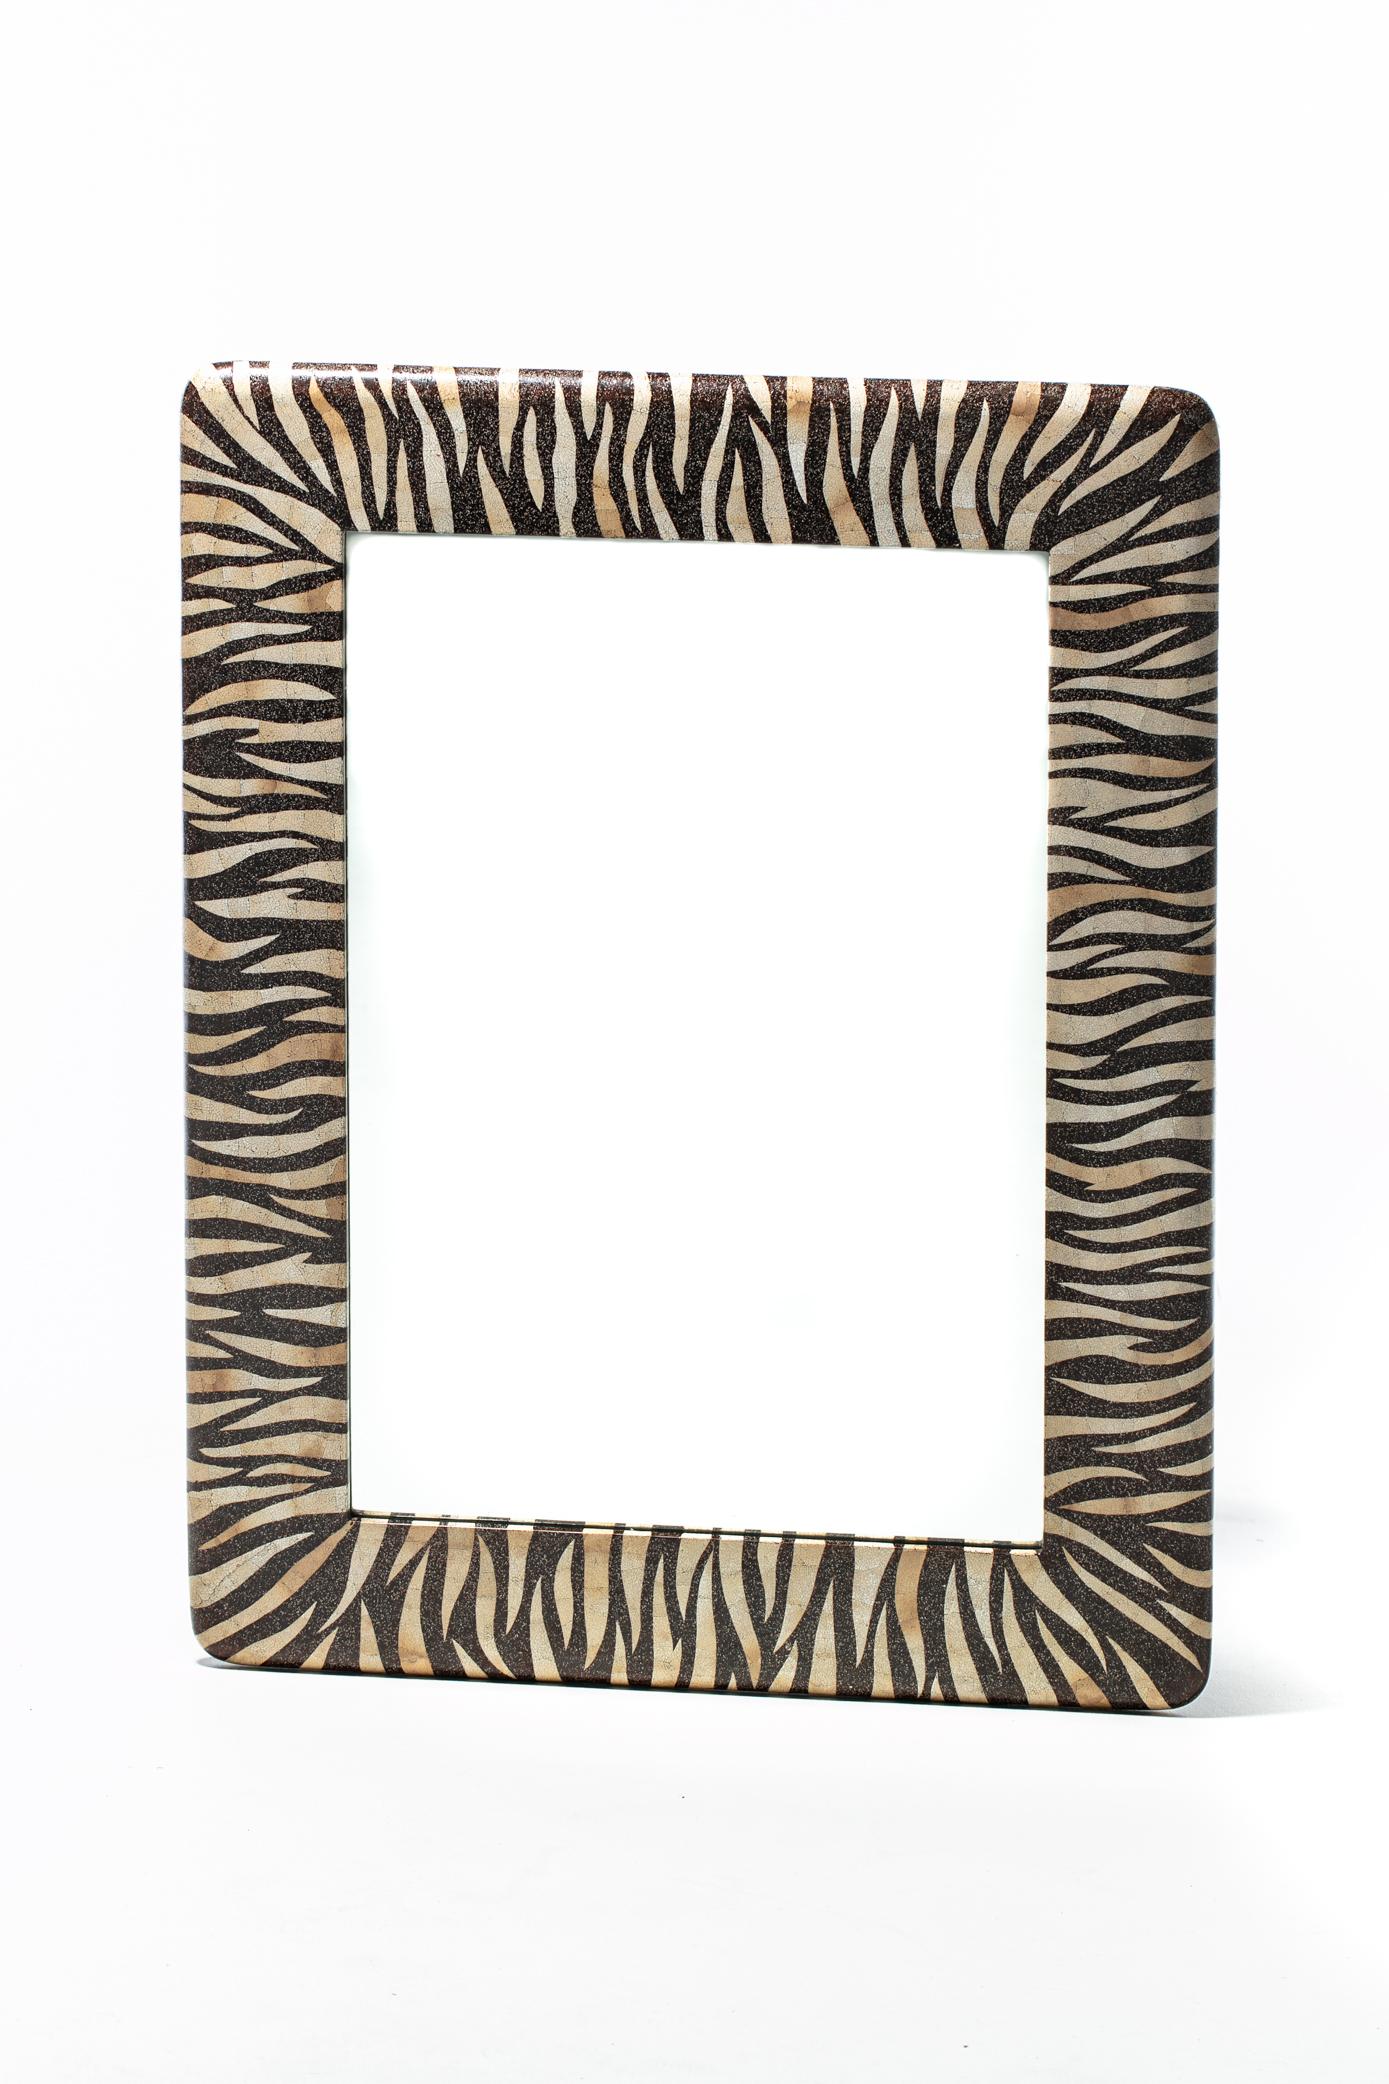 Vietnamese Hand Made Zebra Pattern Mirror Made of Eggshells by Maitland Smith For Sale